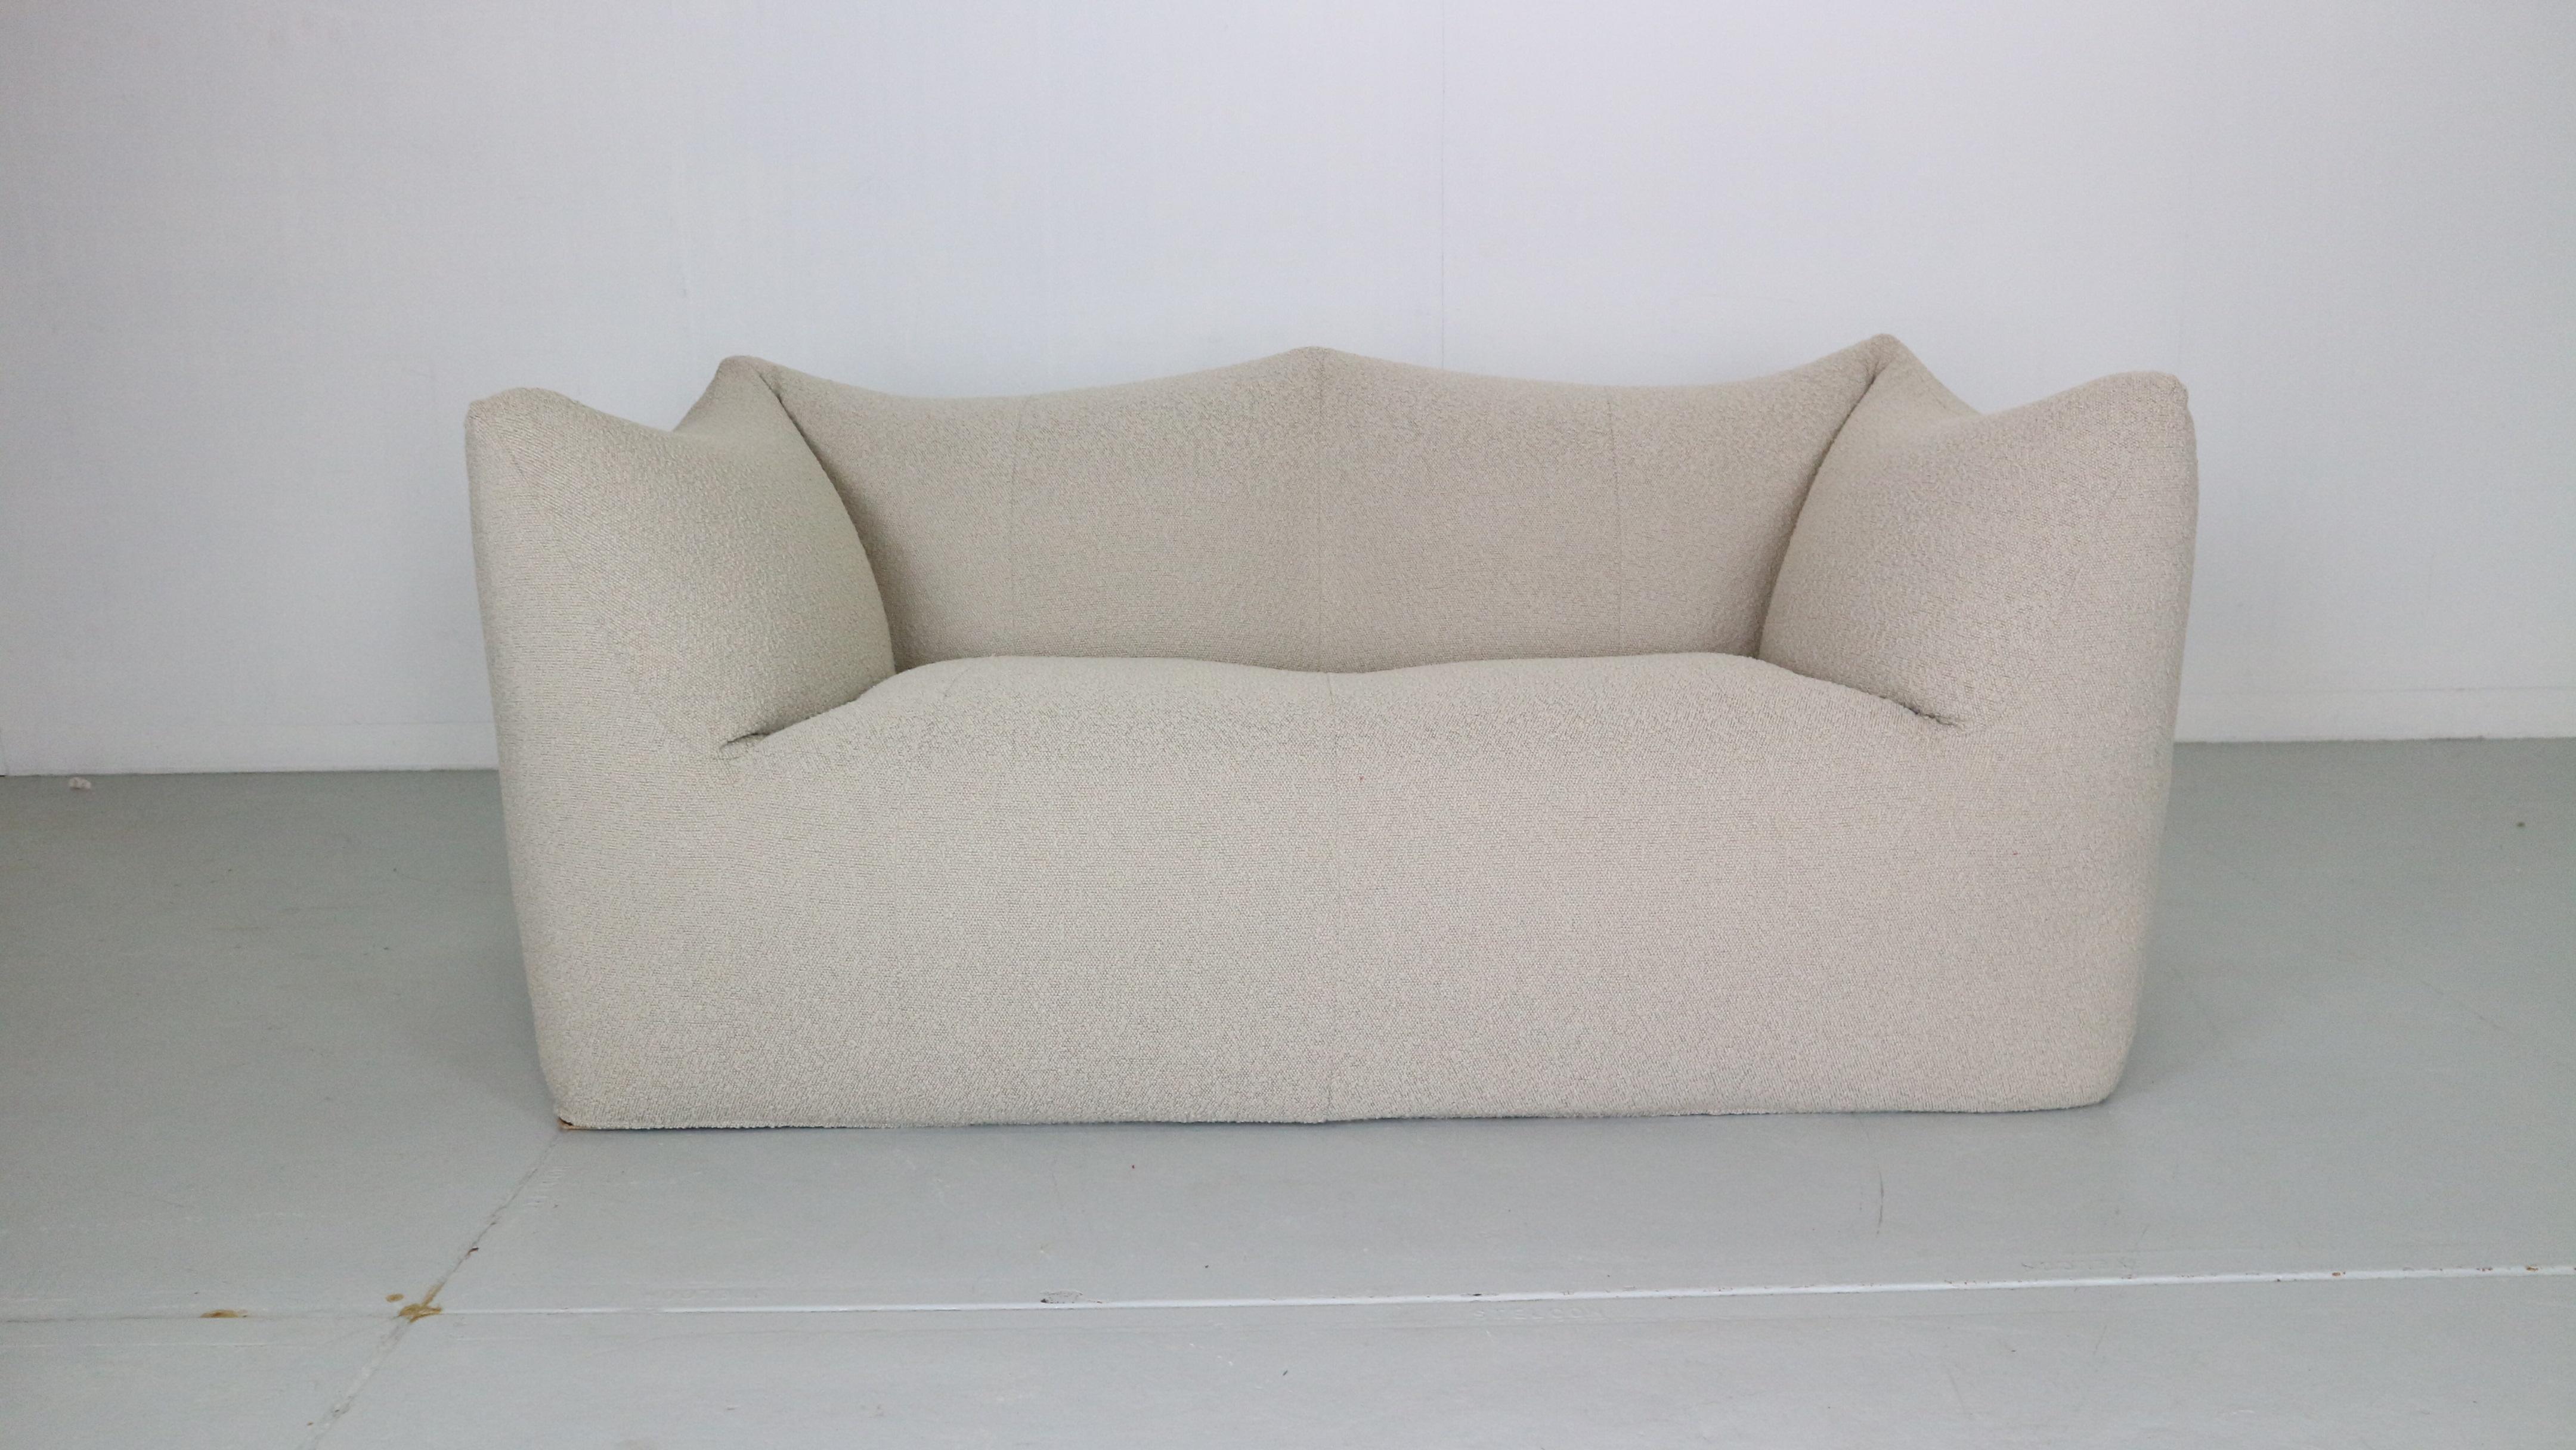 Two seater an original sofa designed by Mario Bellini and produced by B&B Italia, Italy in the 1970s.

Model called 